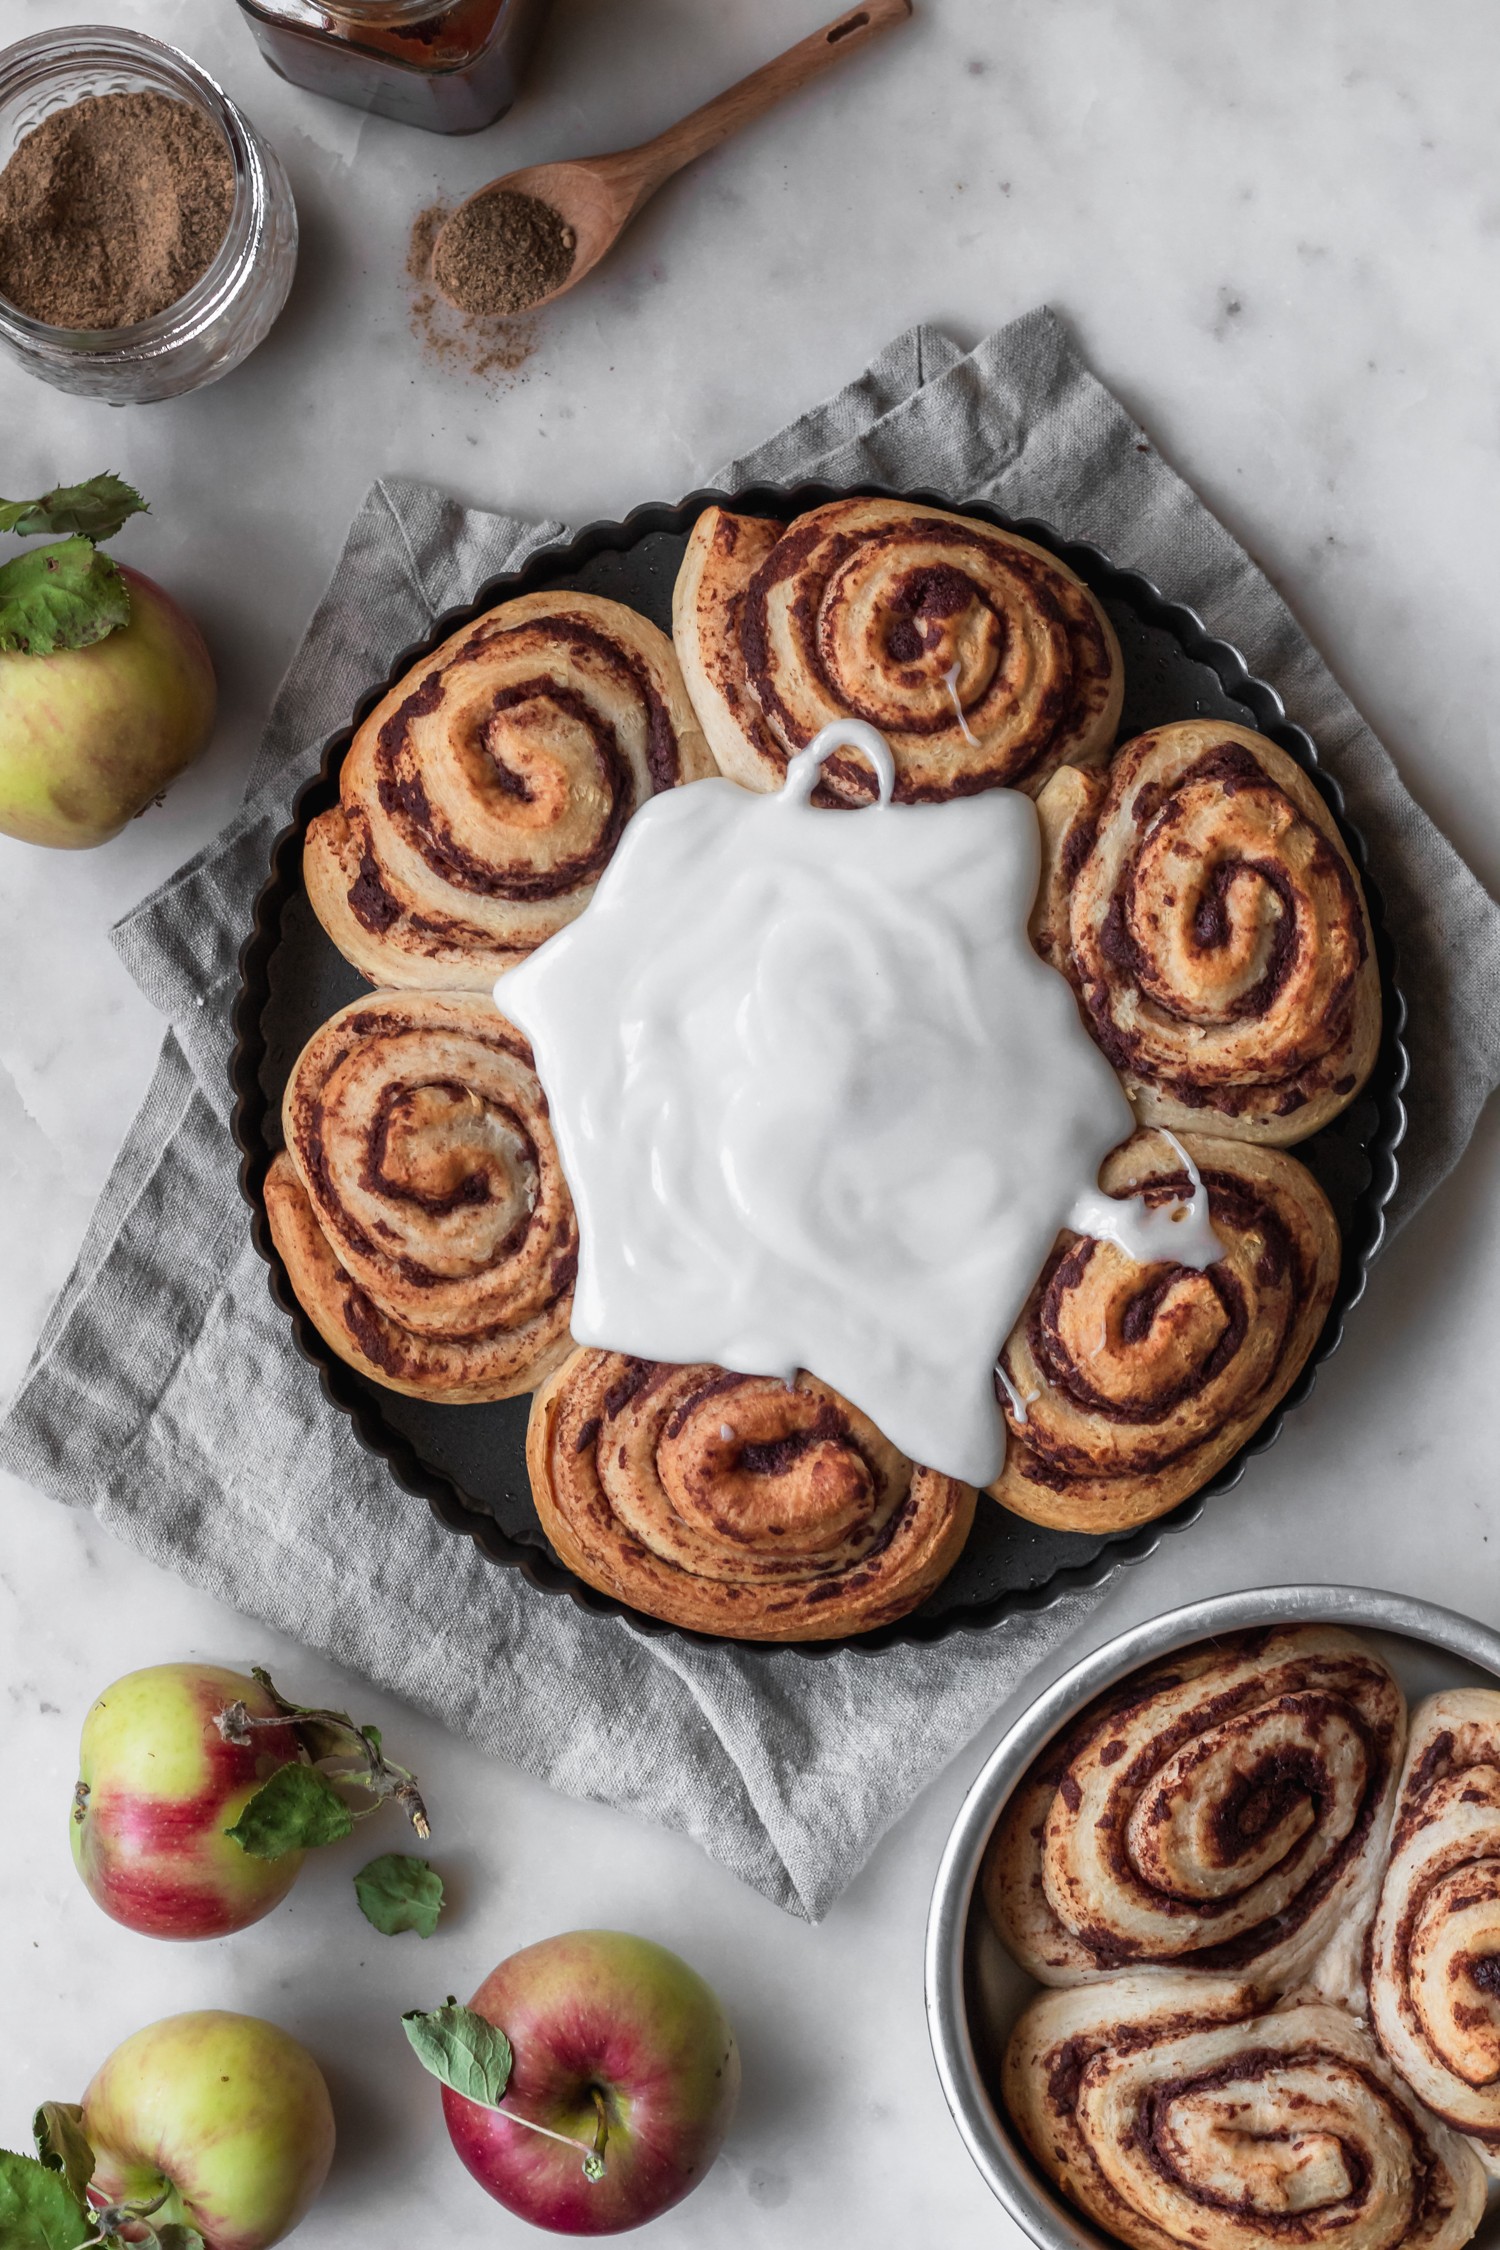 An overhead image of a metal tray of spiced buns with frosting drizzled over them on a marble counter next to a beige linen, small metal tray of buns, and apples.